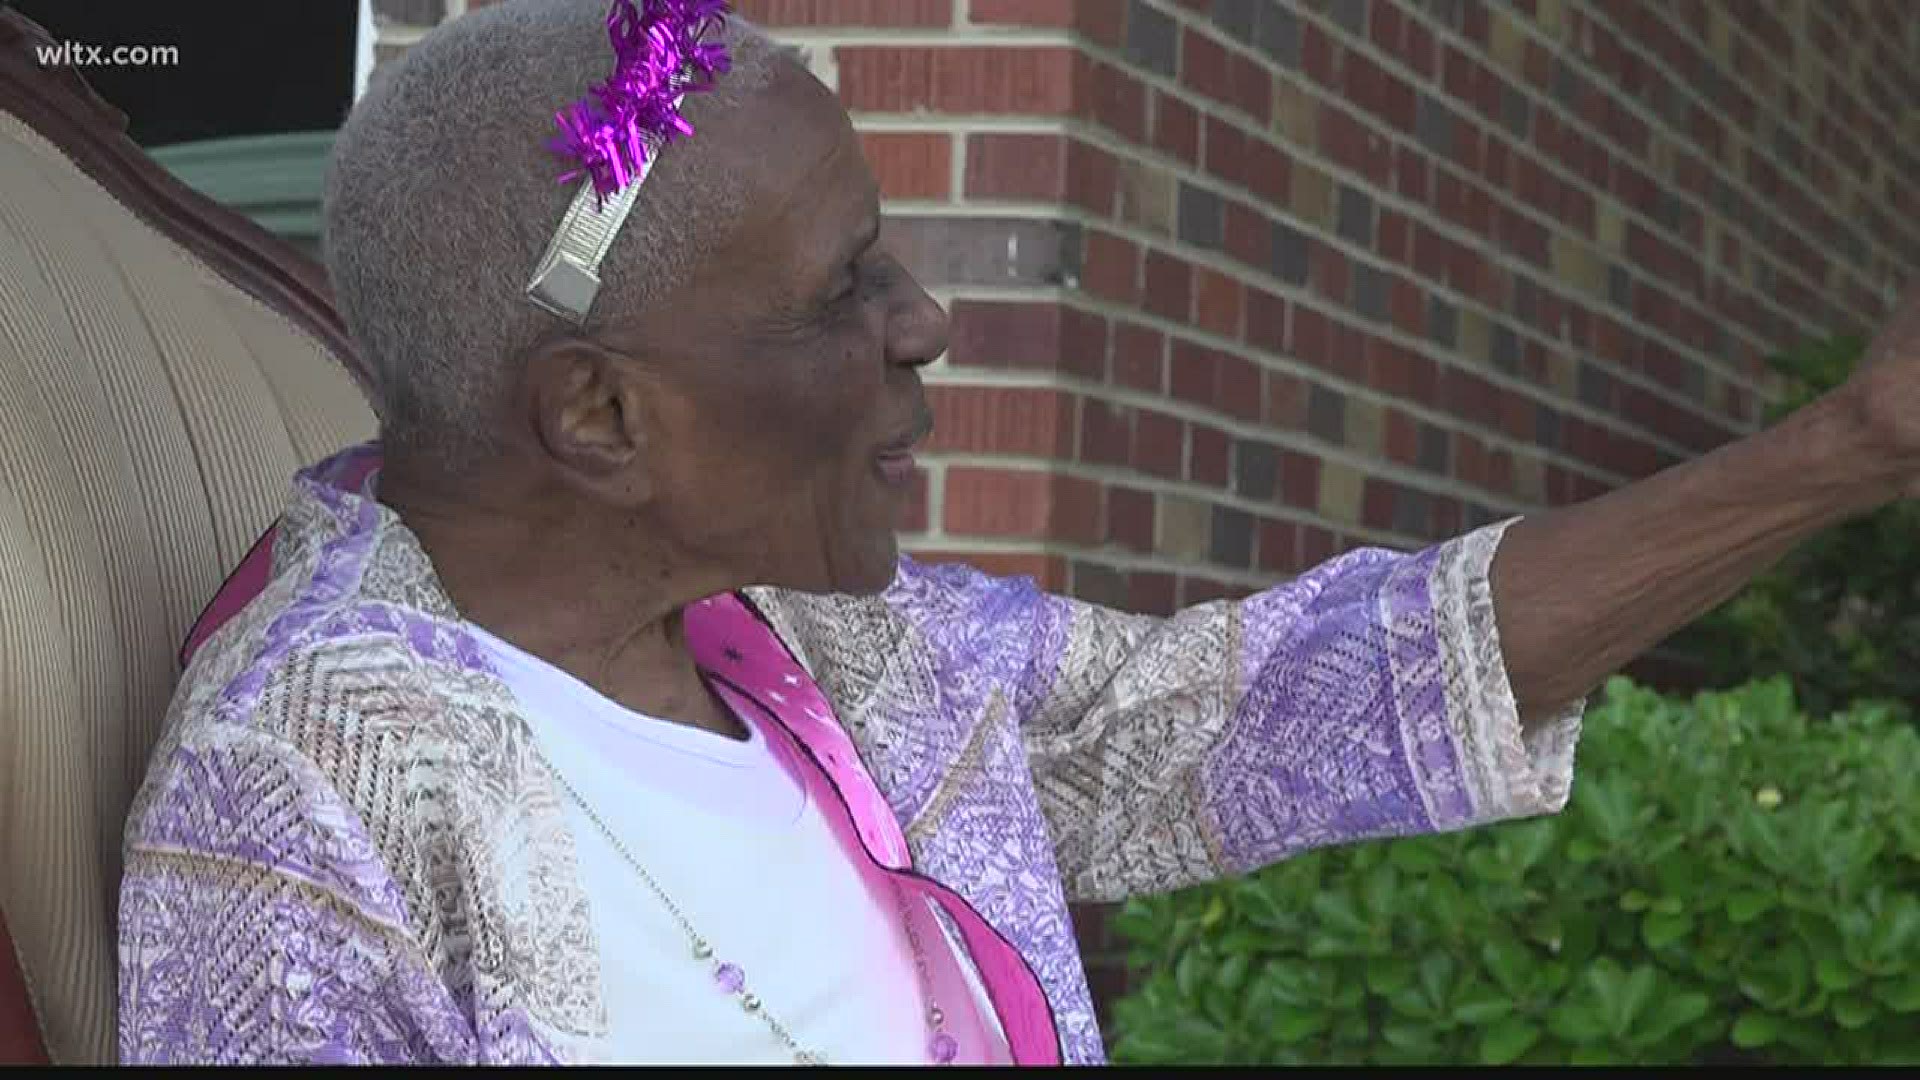 Karen Mae Reese turned 83 today and to celebrate the occasion, her family held a little drive-by birthday party parade